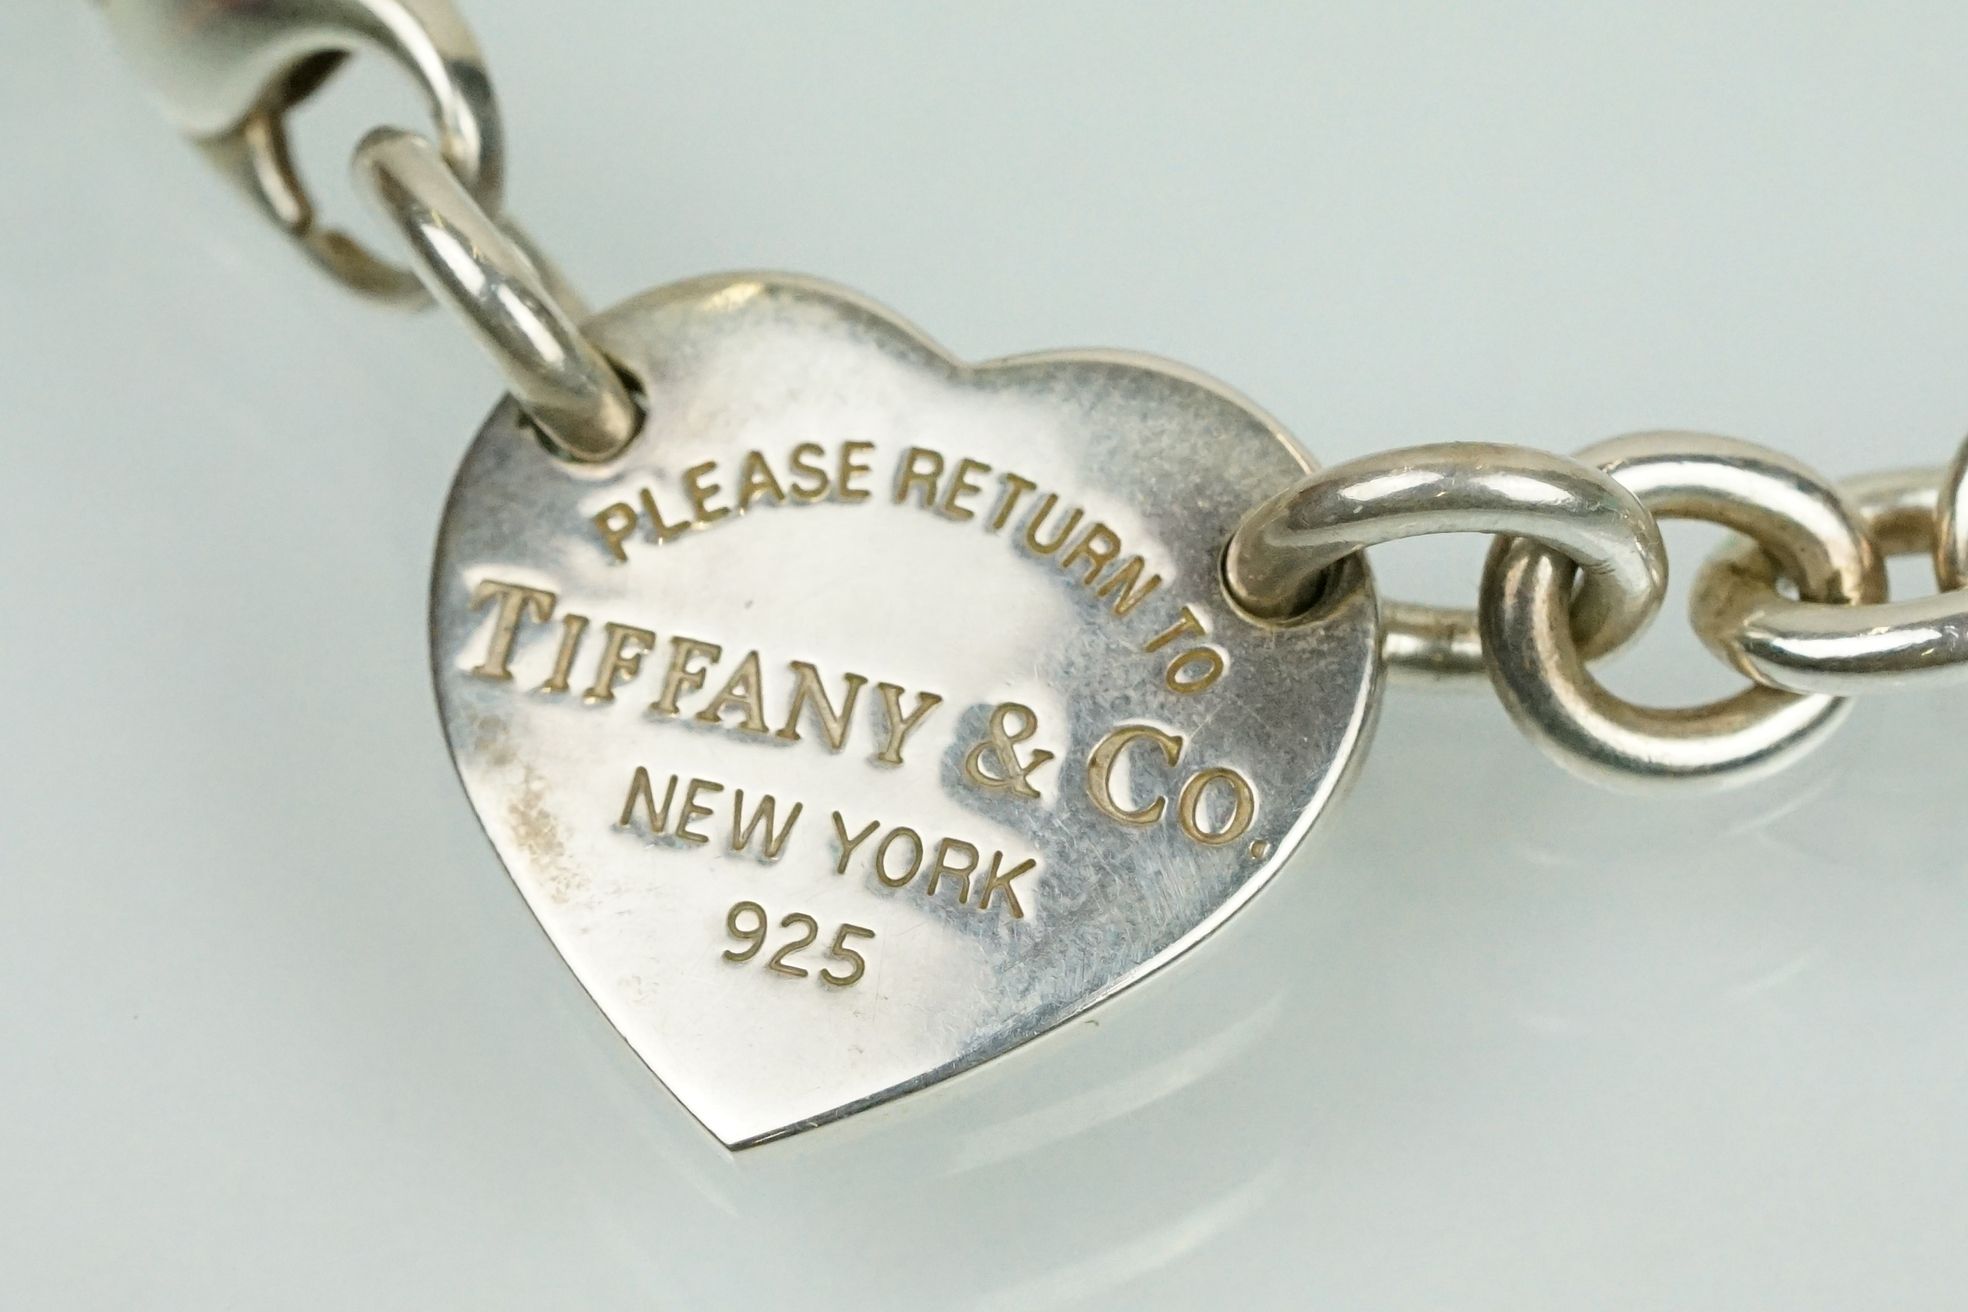 Tiffany & Co 'please return to ' pendant necklace having a heart shaped panel engraved Tiffany & Co. - Image 3 of 5